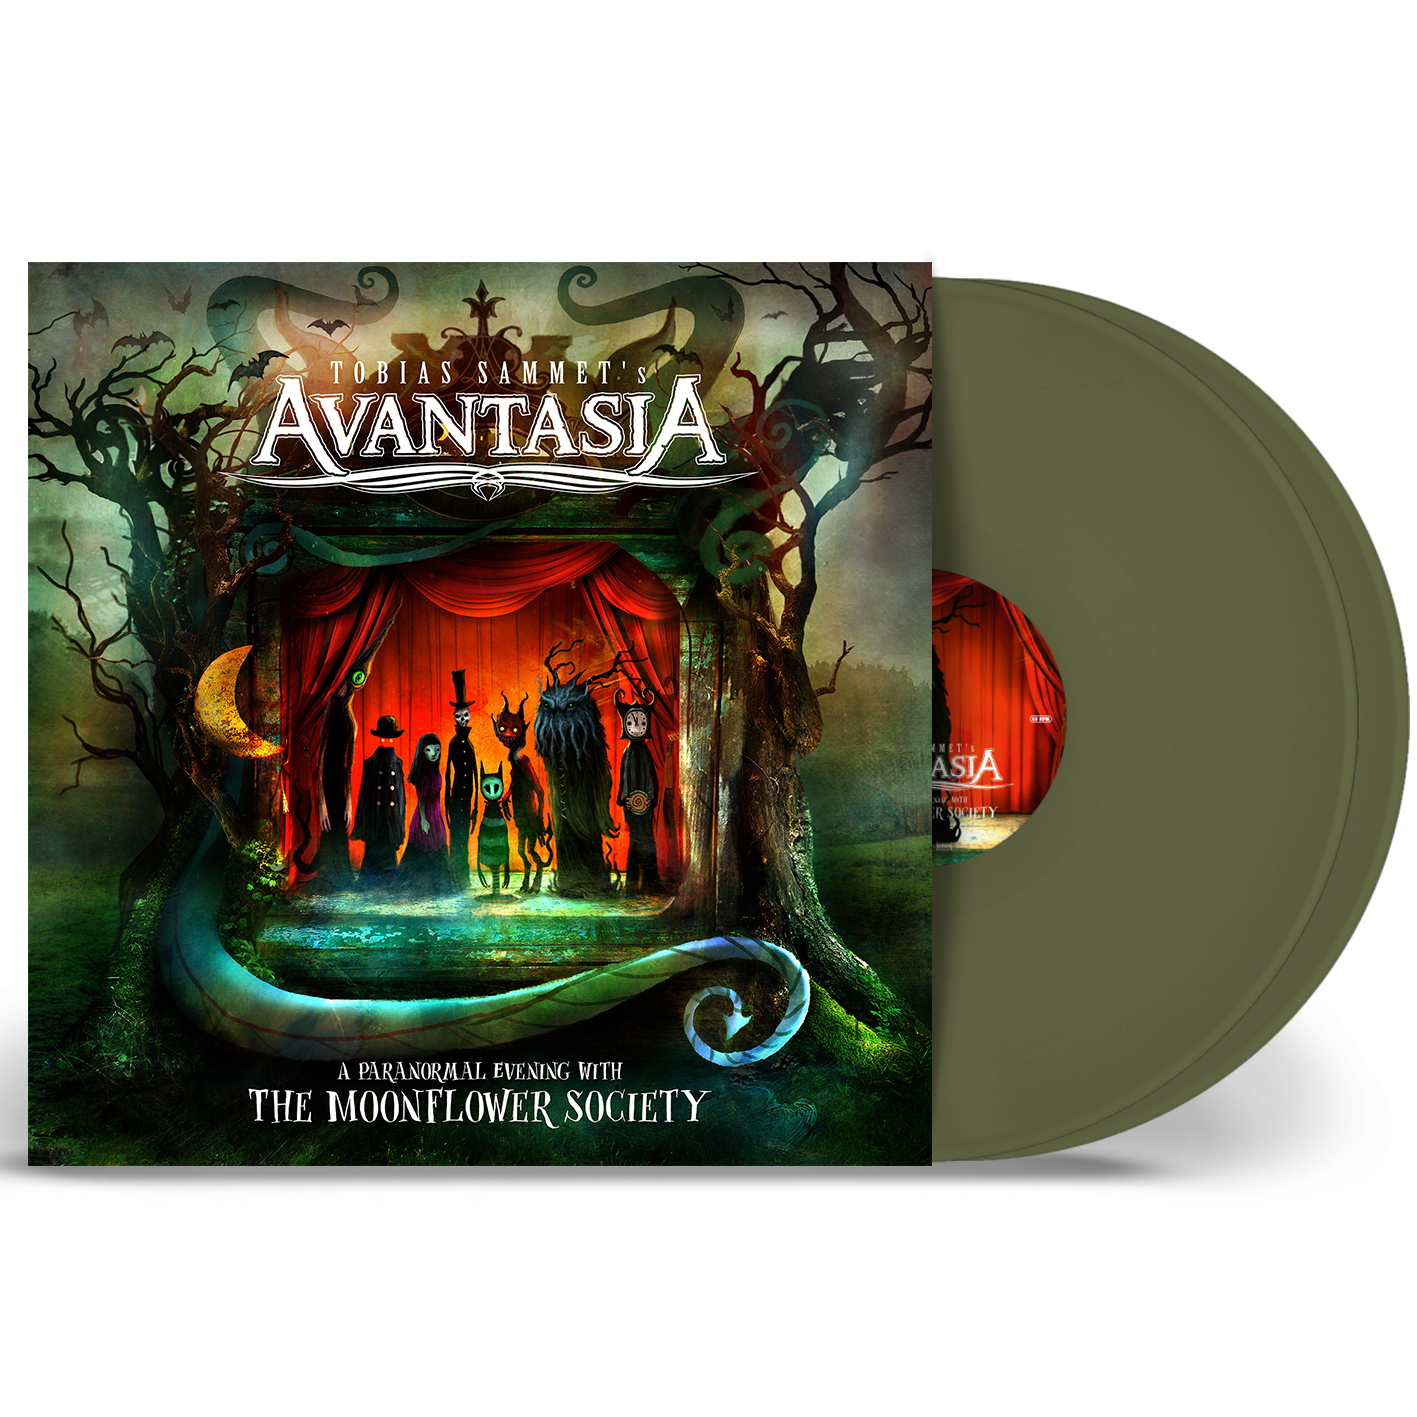 Avantasia - A Paranormal Evening With The Moonflower Society: Limited Moonstone Vinyl 2LP